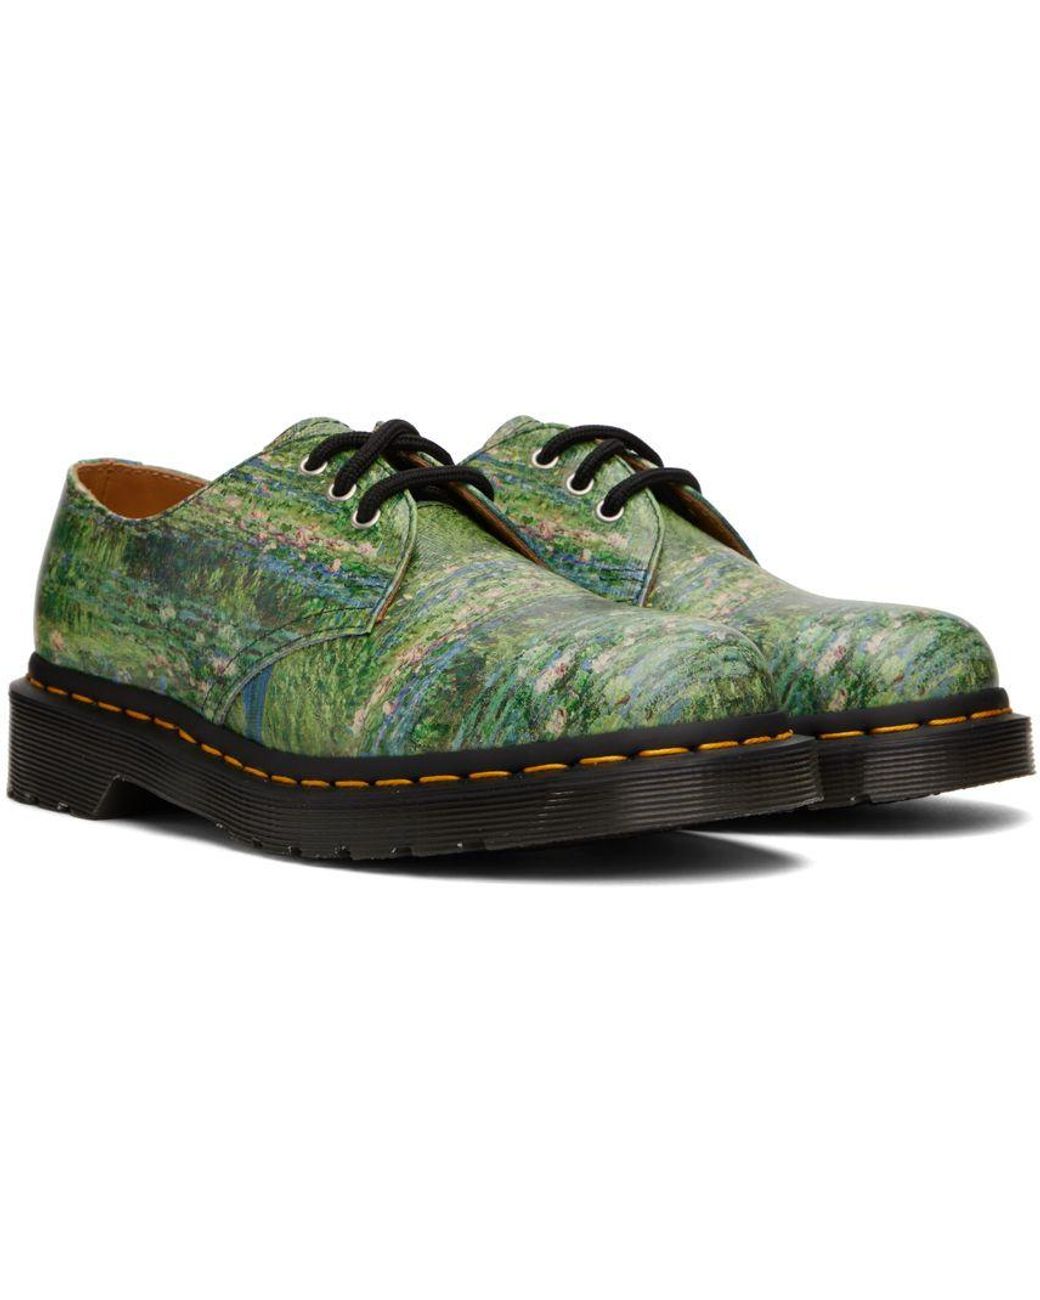 Dr. Martens The National Gallery Edition Monet 1461 Oxfords in Green | Lyst